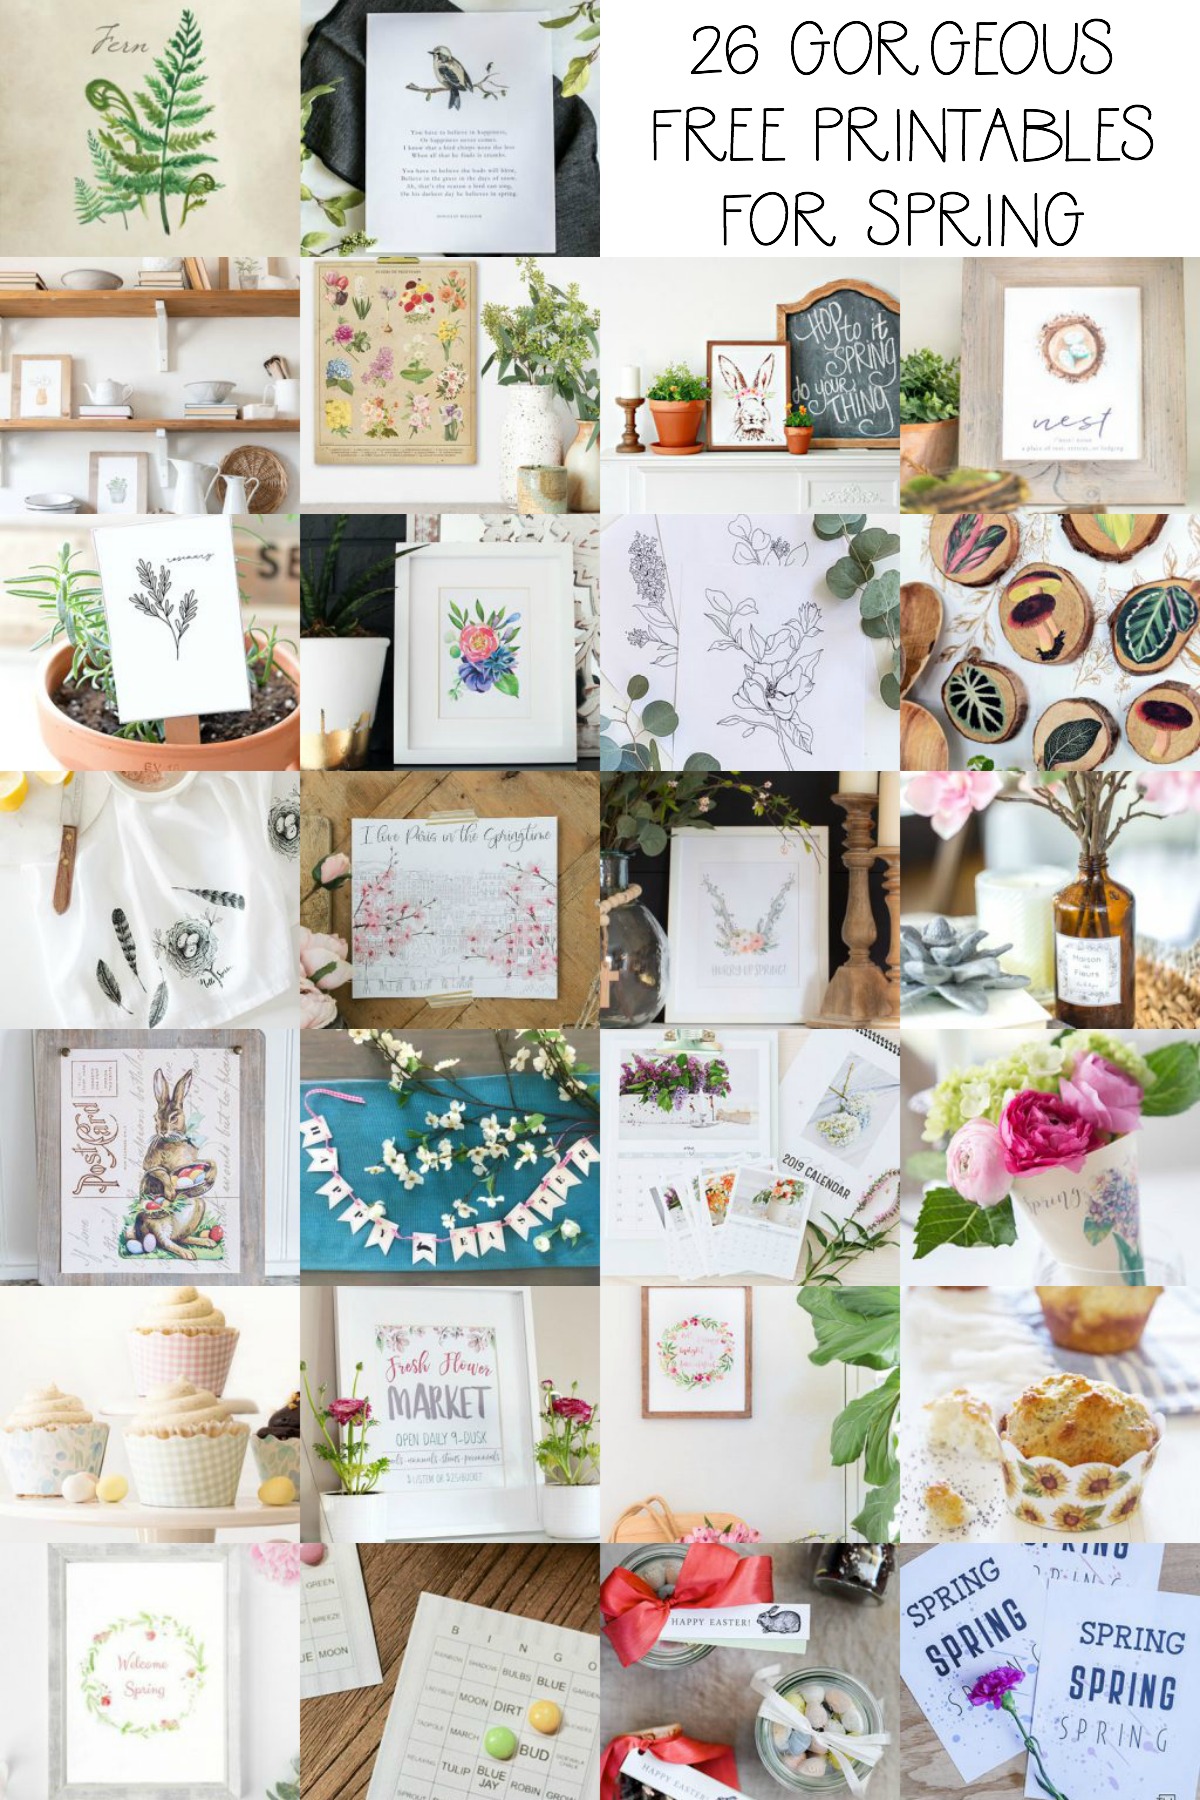 26 Gorgeous free printables for spring poster.